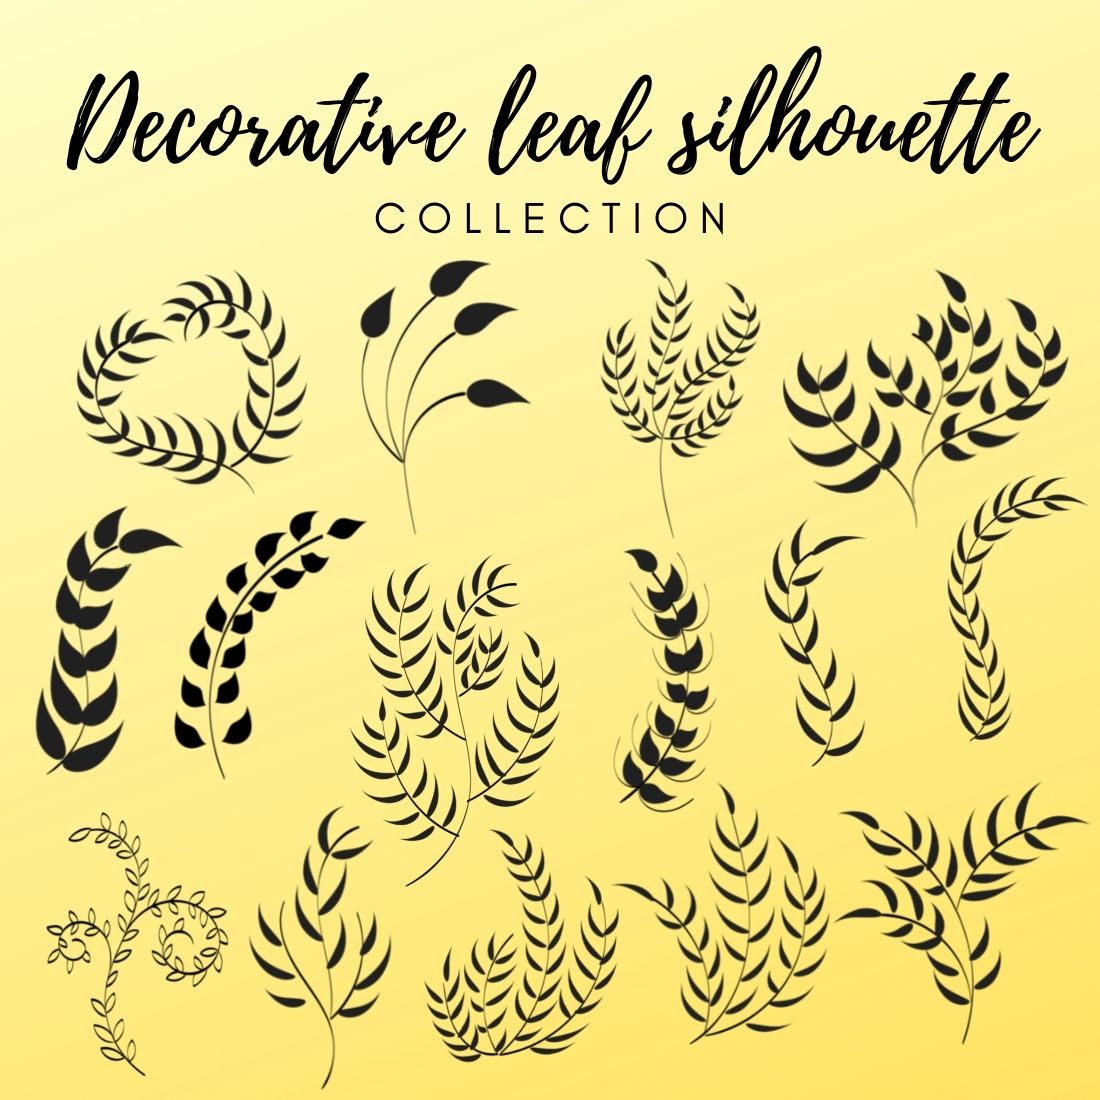 15 Decorative Leaf Silhouette - Only $8 cover image.